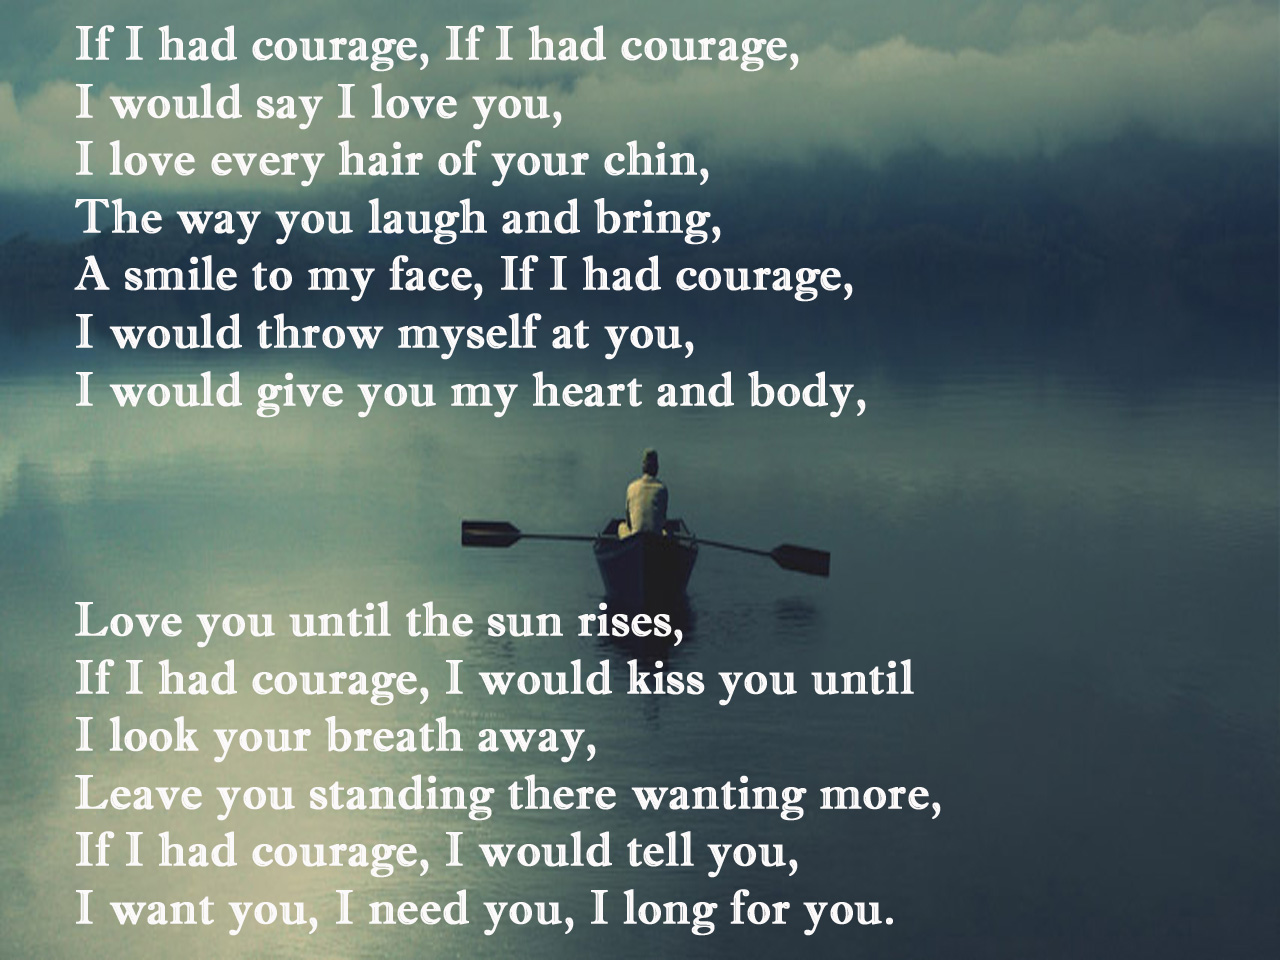 Courage Poems With HD Wallpapers For Her - Poetry Likers